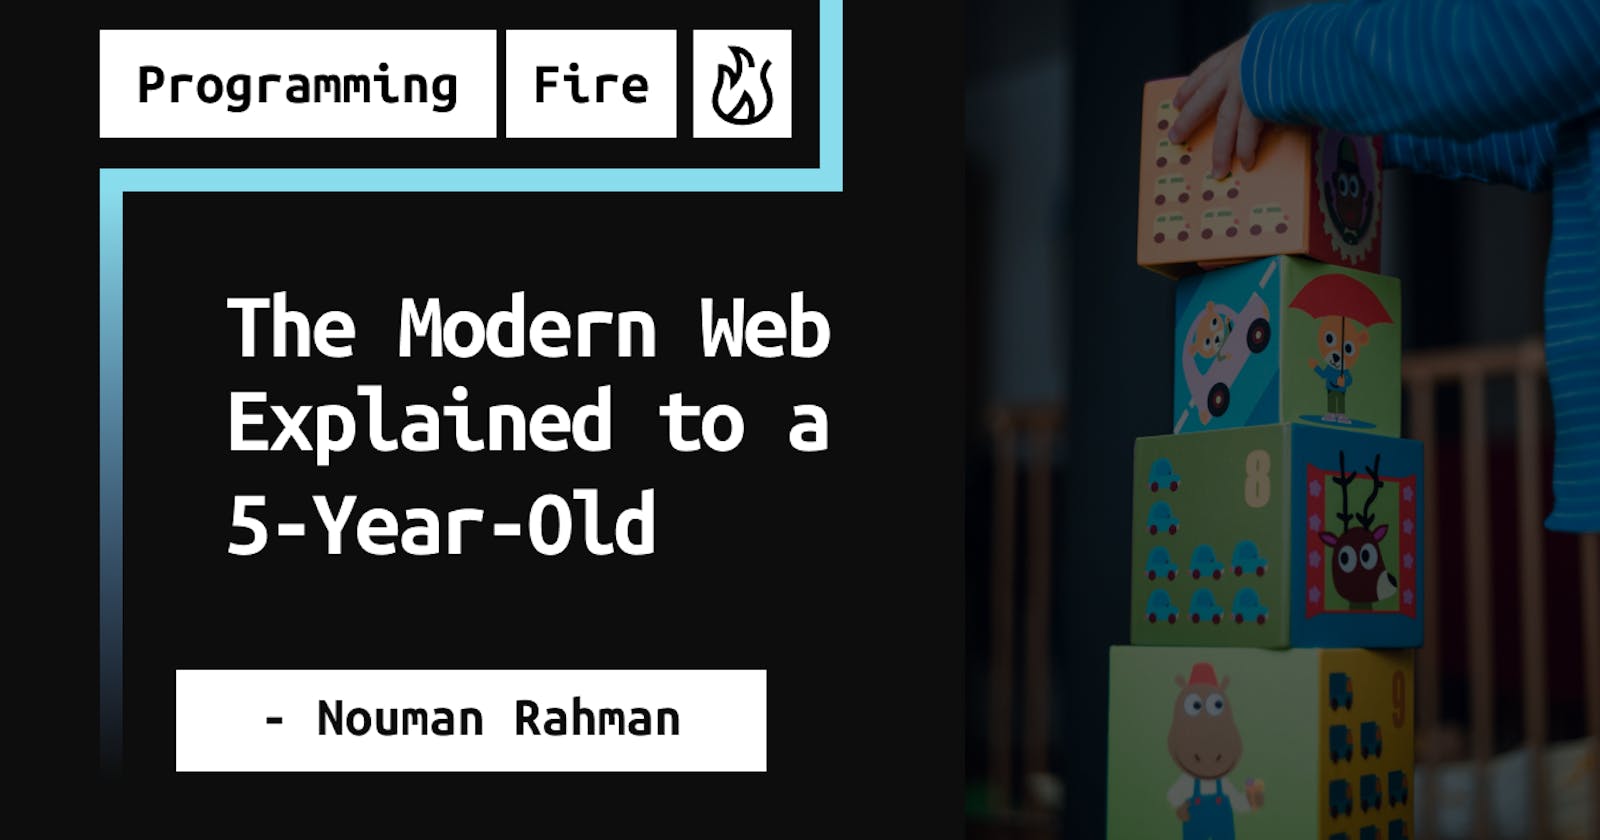 The Modern Web Explained to a 5-Year-Old